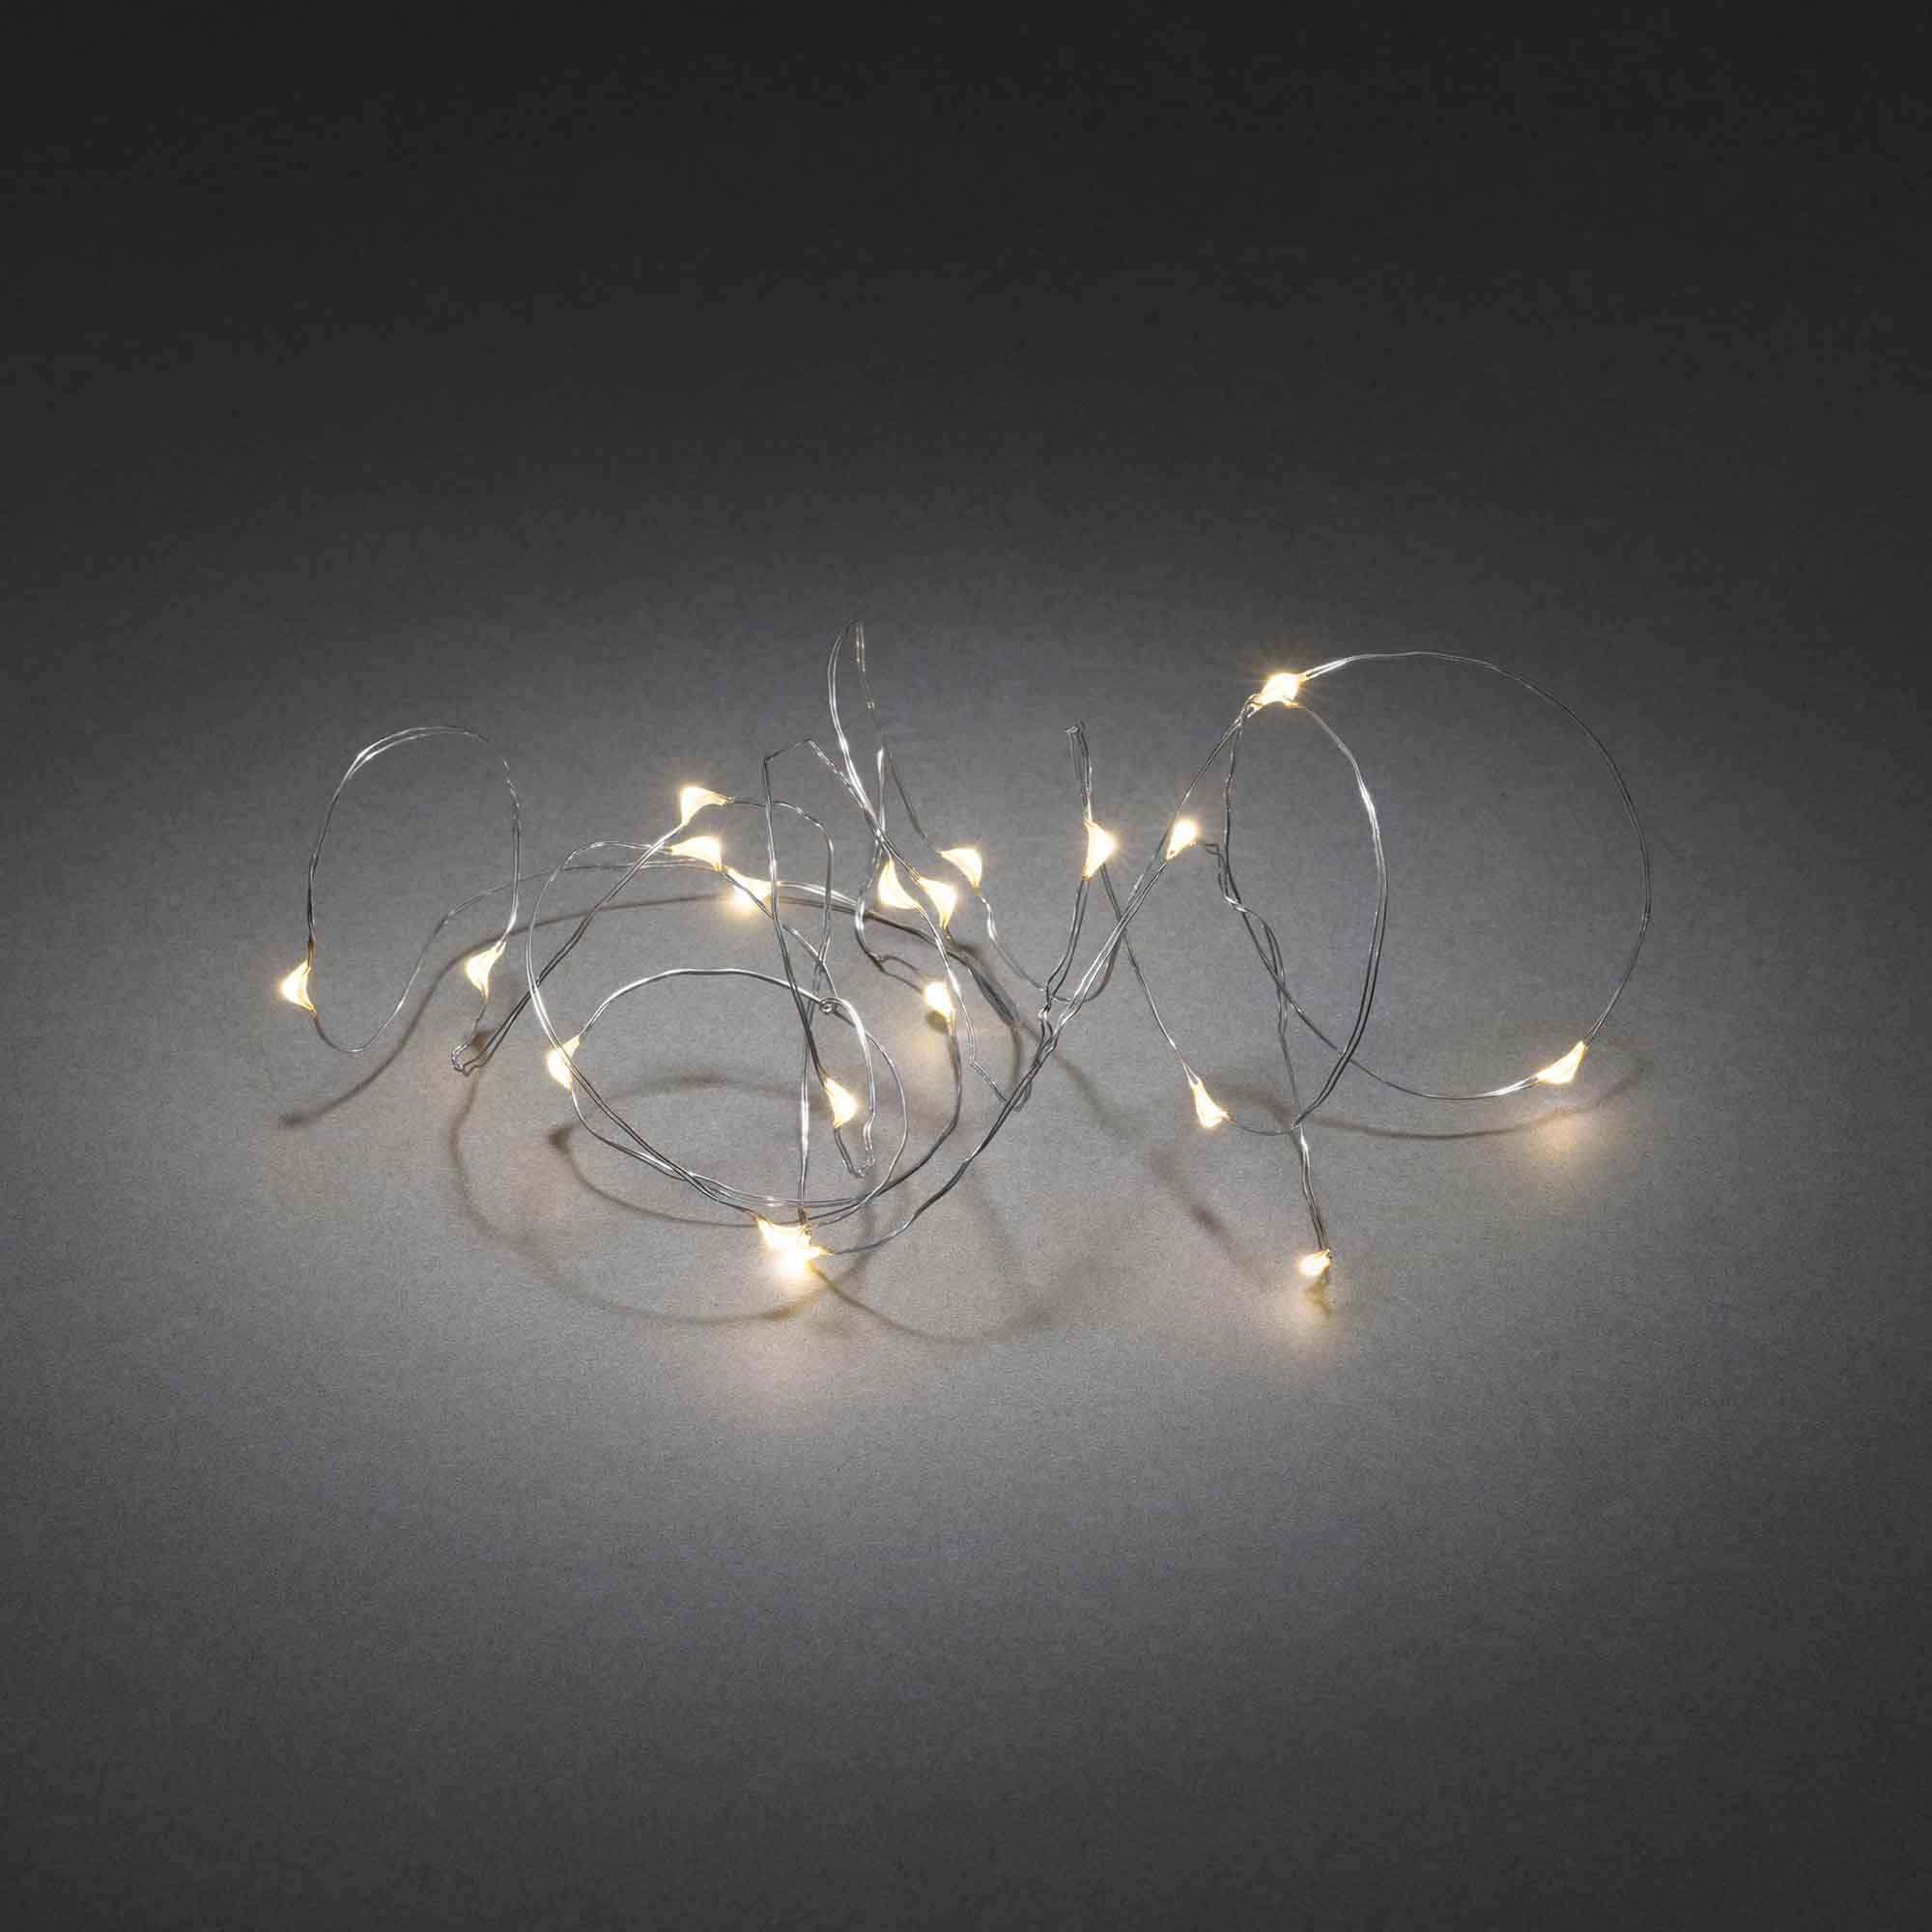 Battery fairy light wire 40 LEDs warmwhite